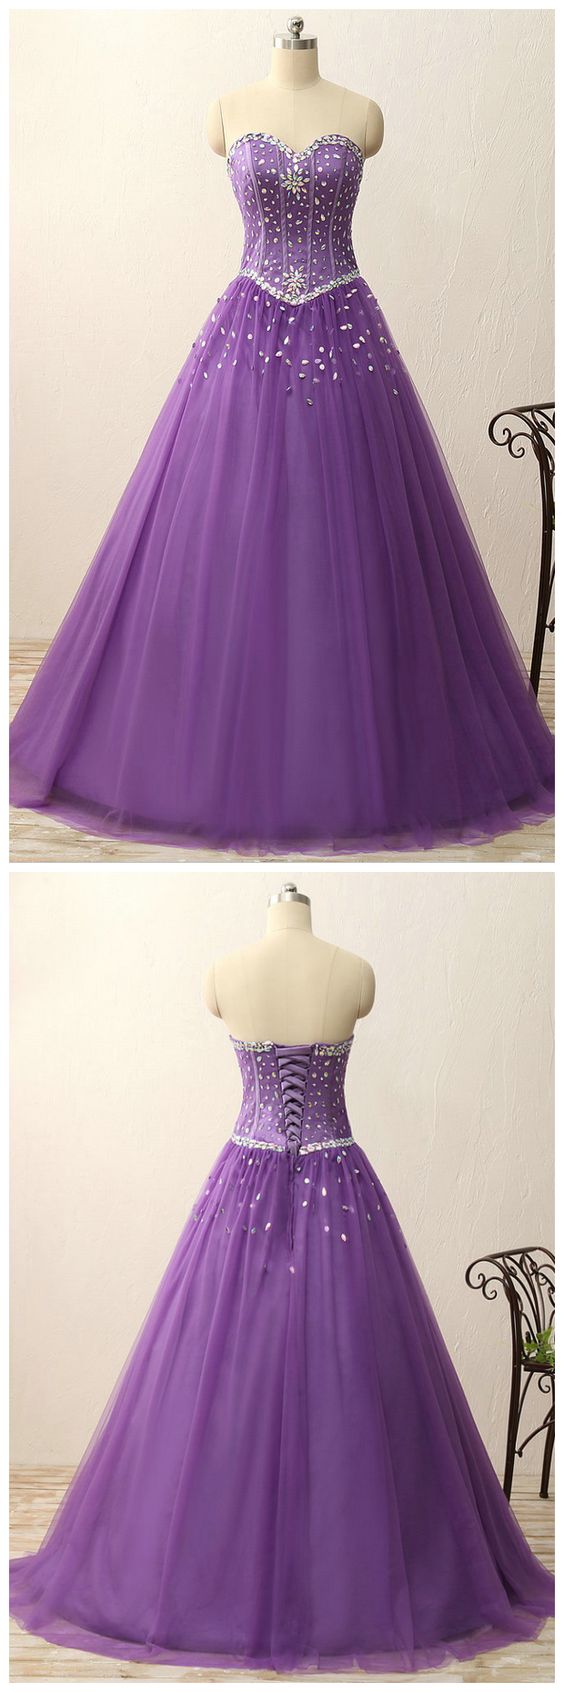 Charming Prom Dress, Formatura Sweetheart Crystal Beads Satin Tulle Floor Length Ball Gown Vintage Dress Prom Dress M5840